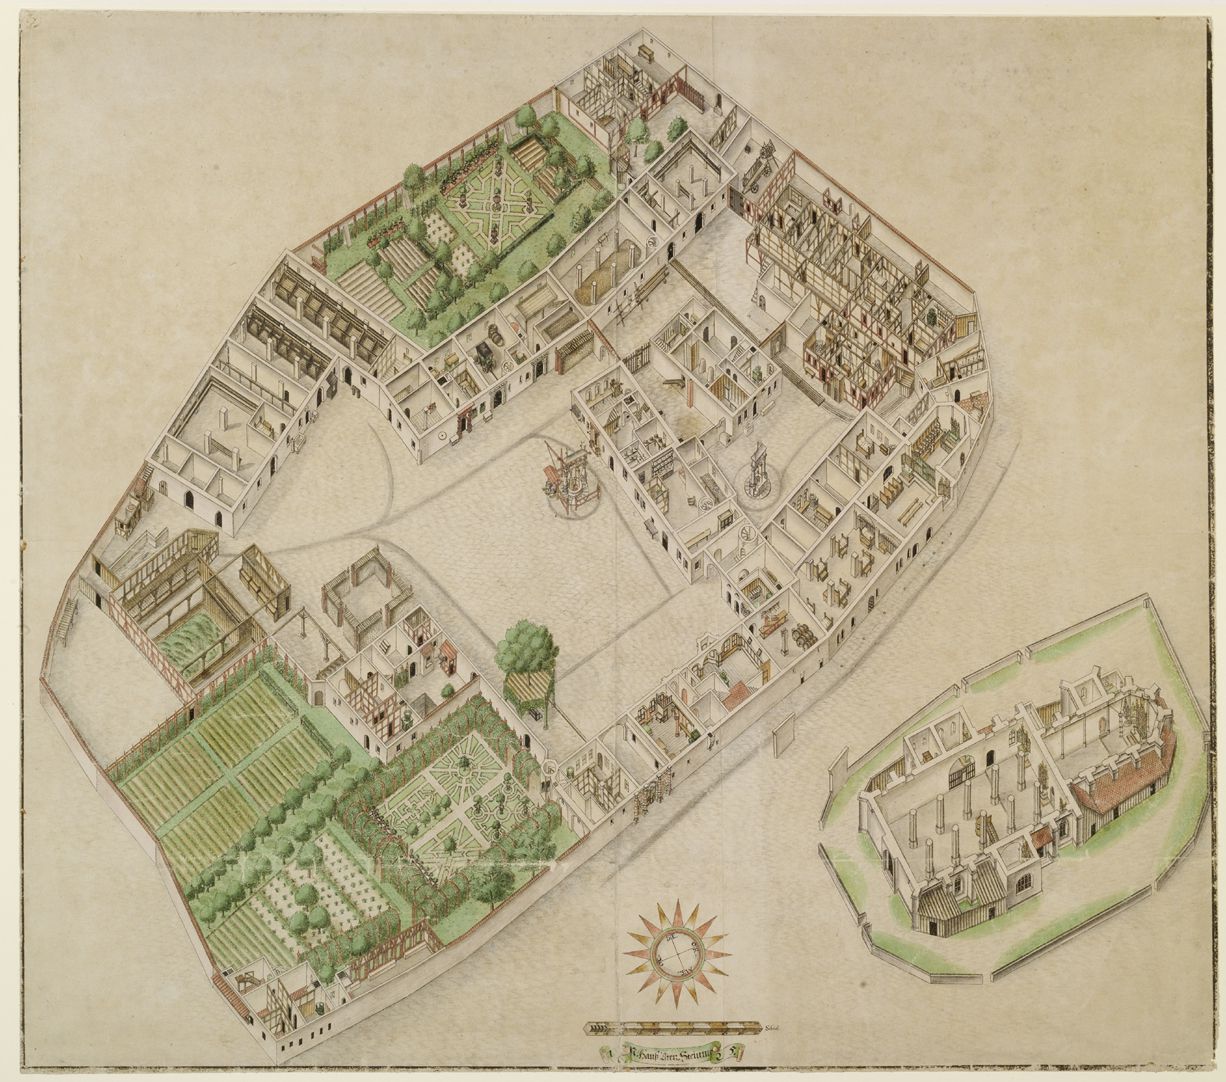 Isometric Picture of the whole plan of the German House in Nuremberg with view into the ground floors General view: at the bottom flower and kitchen garden (the western area was the cultivated part), at the top the so called gold-workers´ garden, on the right of that the old hospice houses and tenements